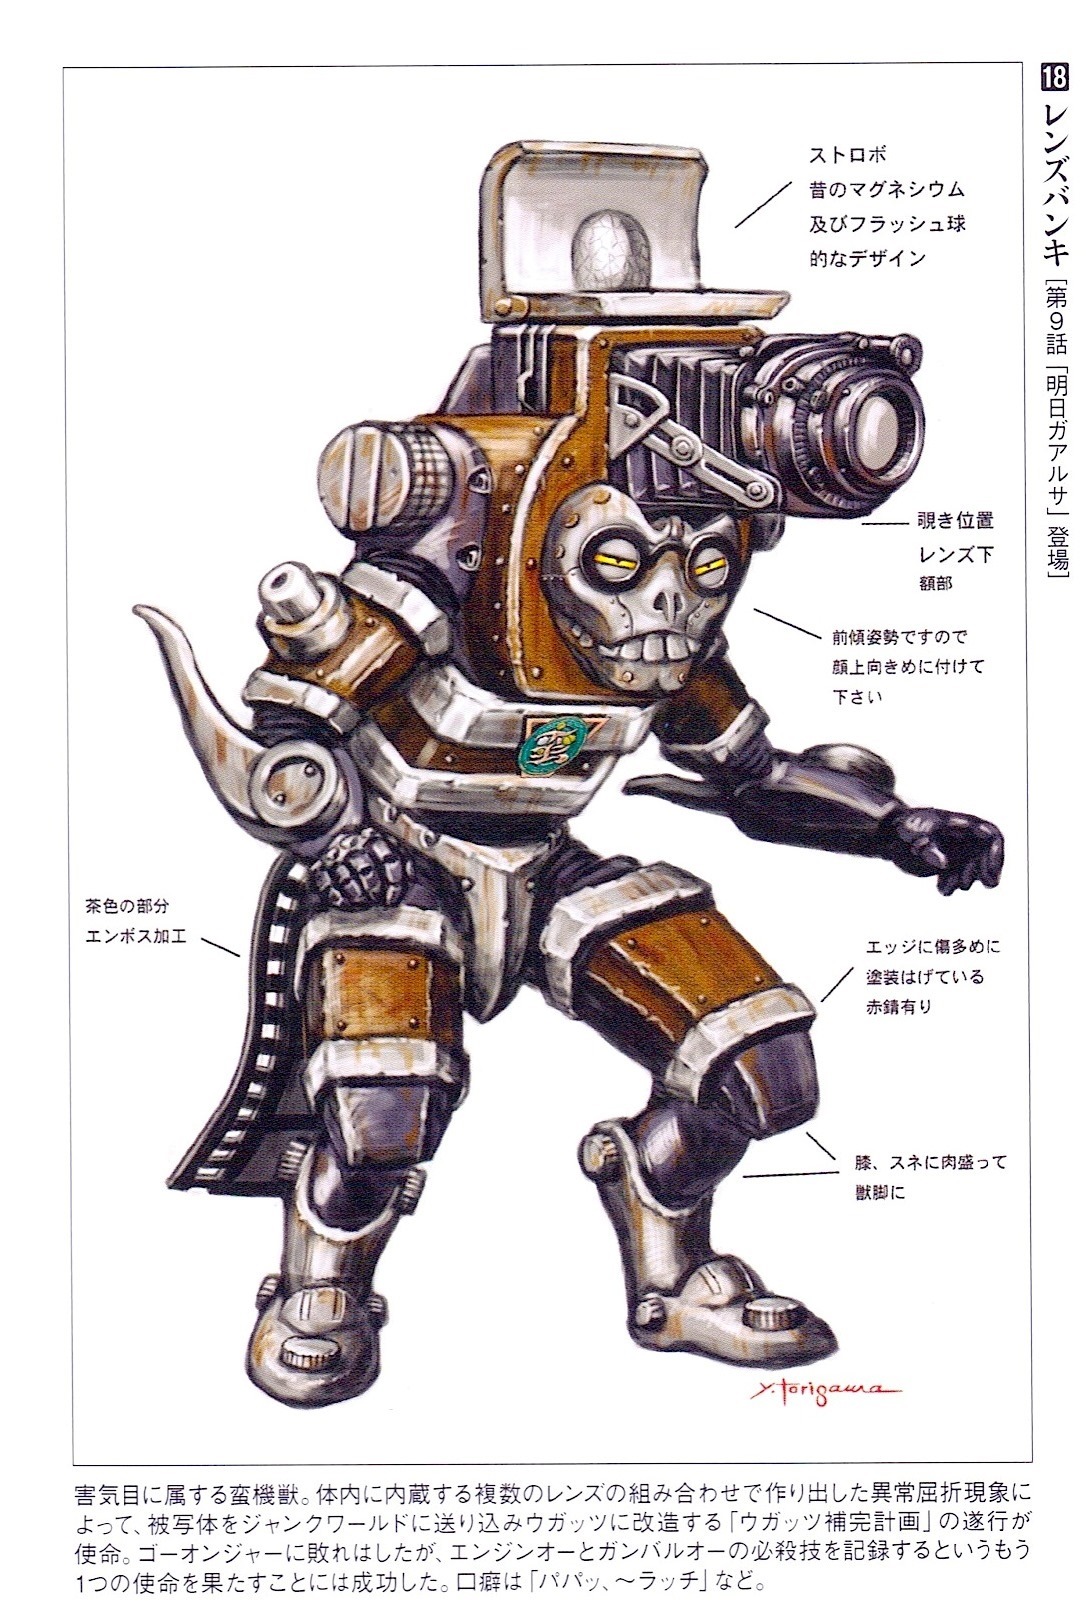 Here are the Sentai monsters based on cameras.... - Crazy Monster Design